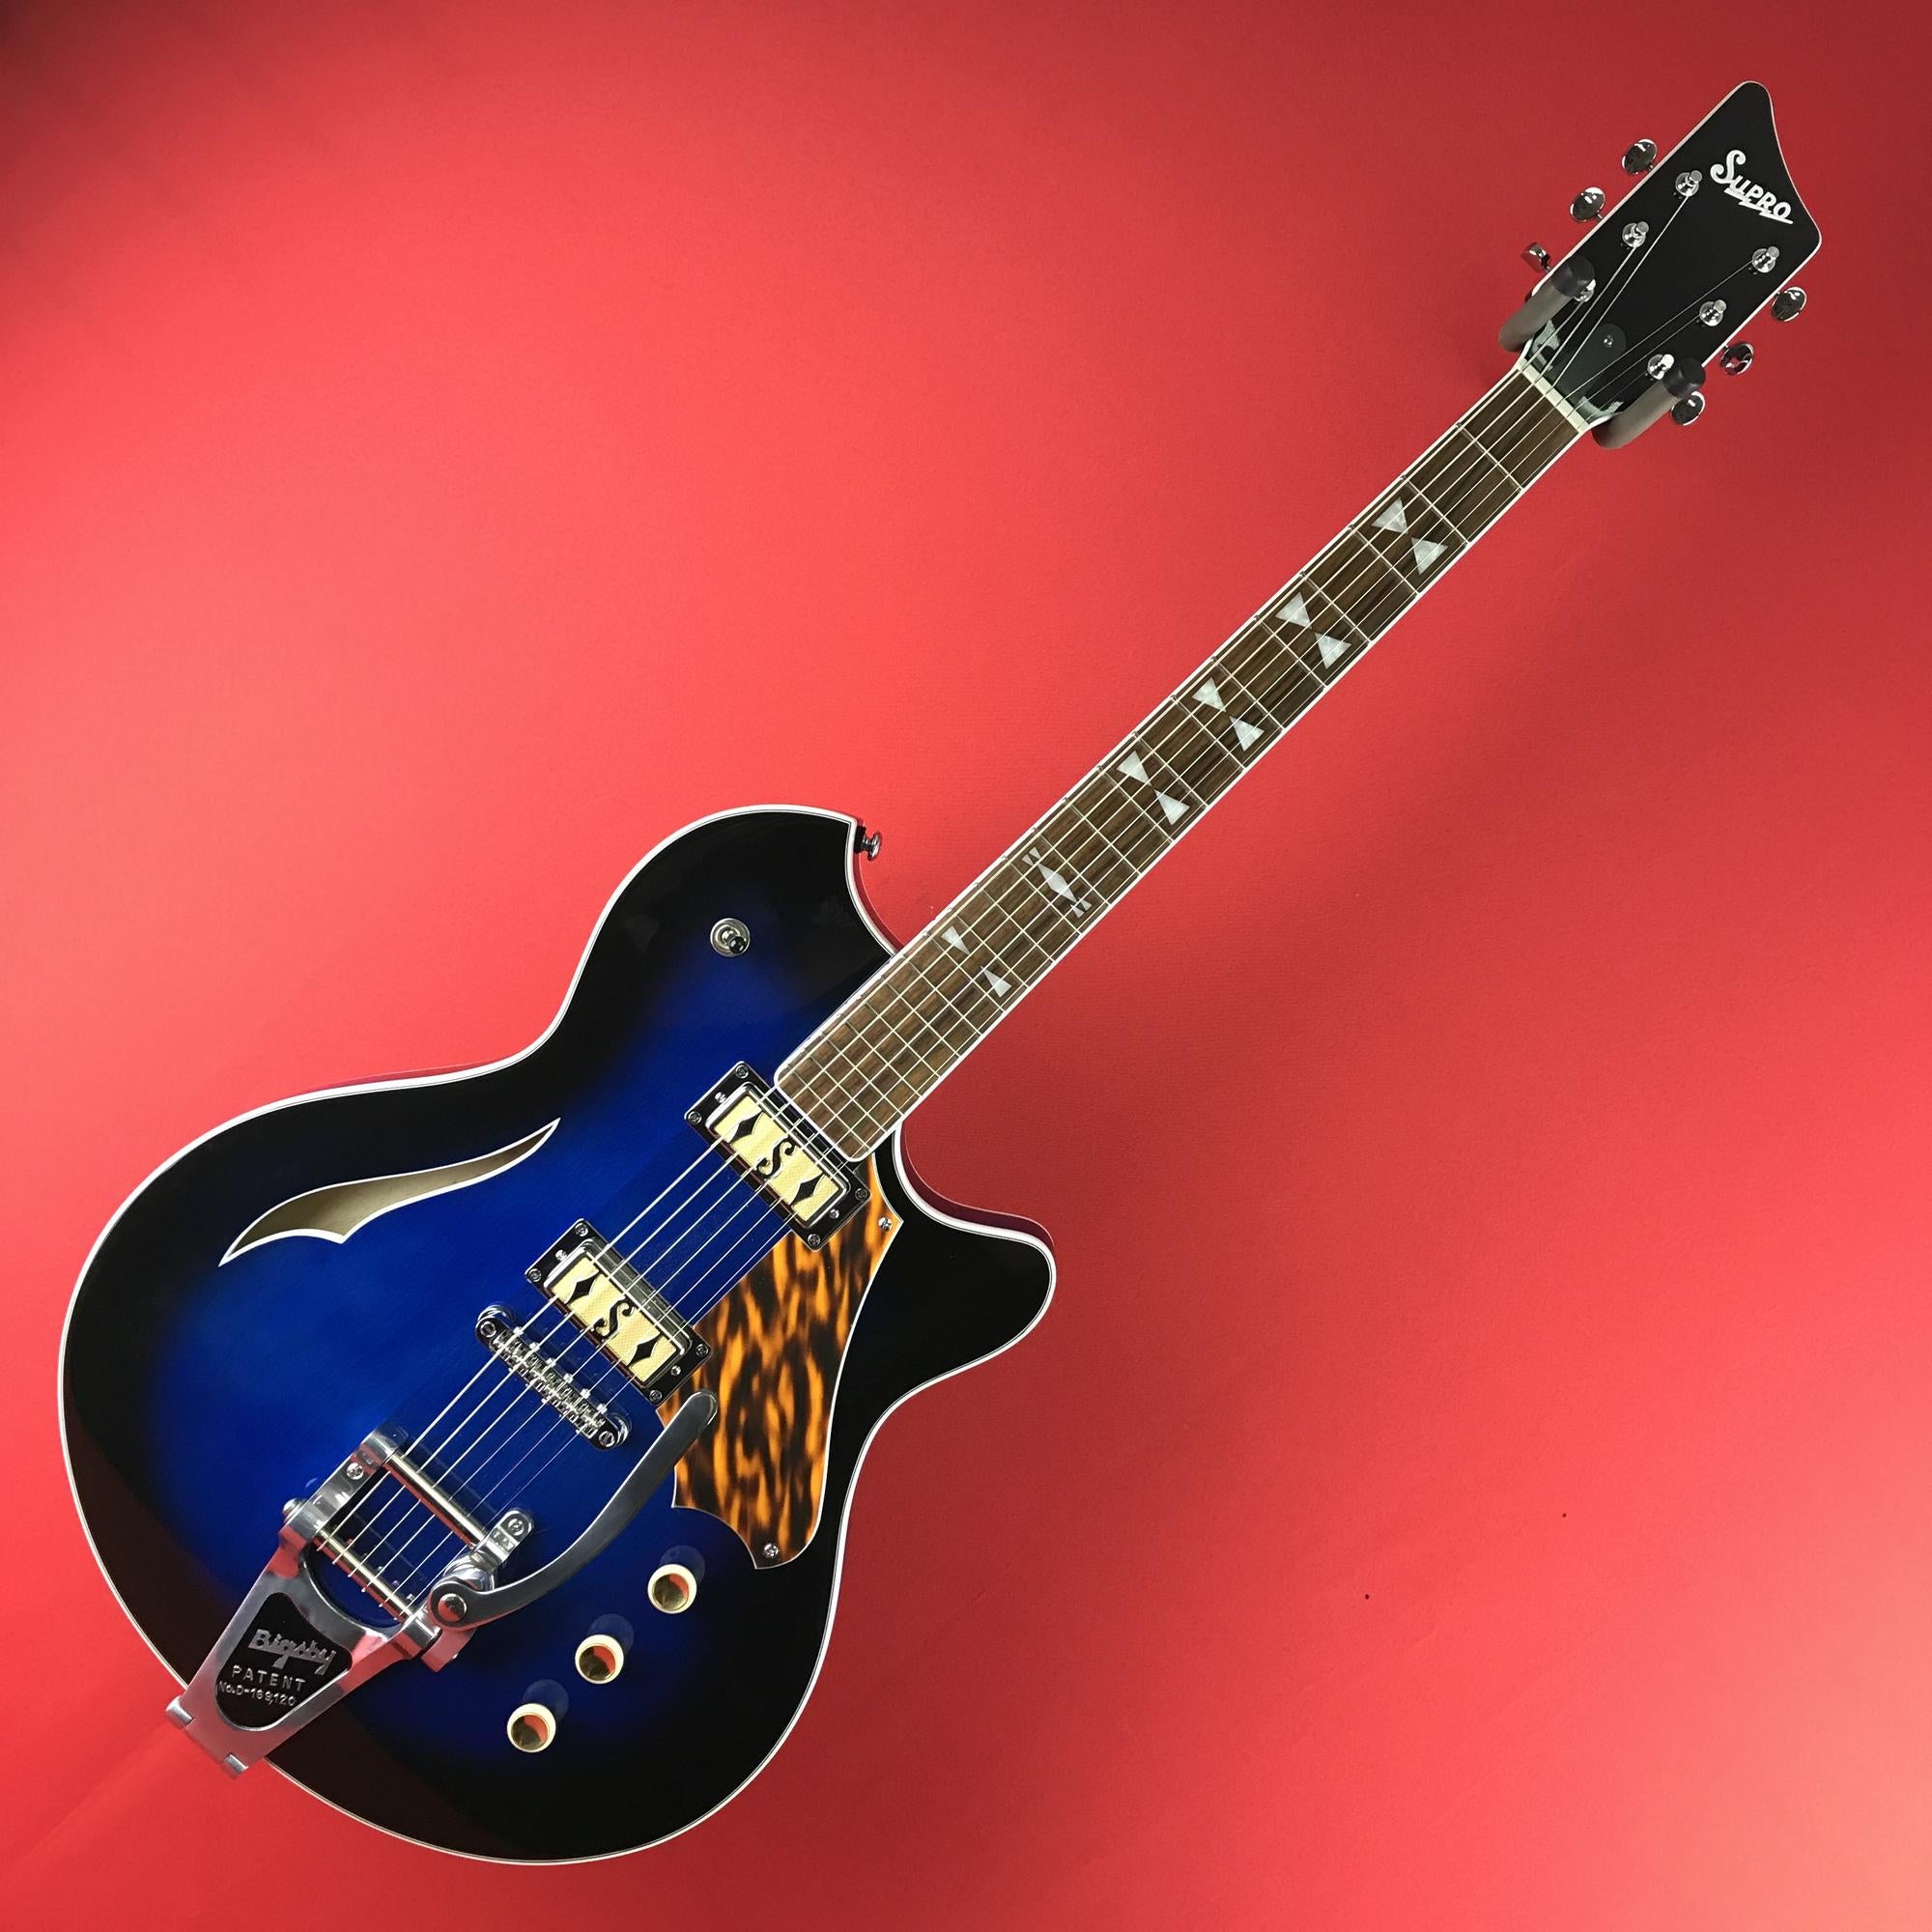 [USED] Supro 2052ABB7 Clermont Midnight Blueburst w/Bigsby